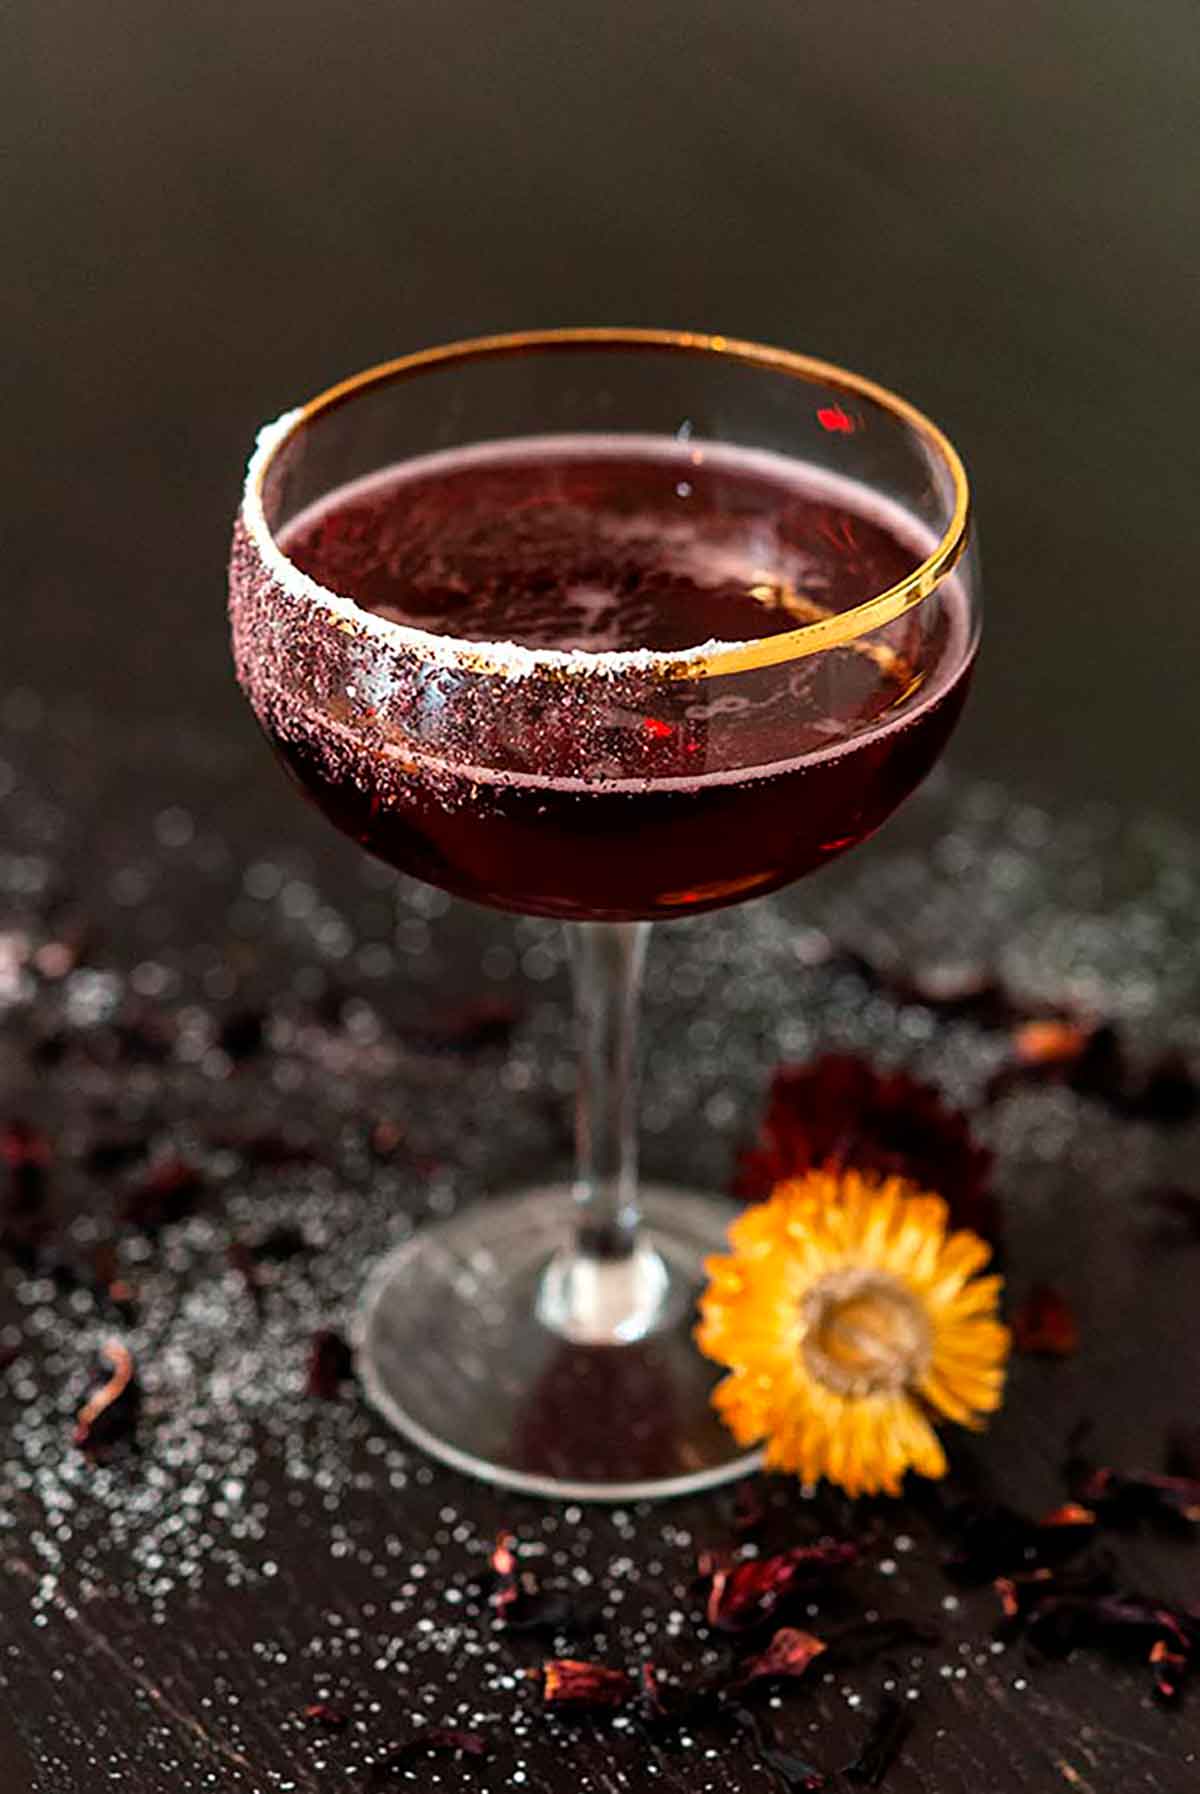 A sparkling spiced hibiscus cocktail on a dark table, sprinkled with sugar and cloves, with a tiny flower placed beside it.